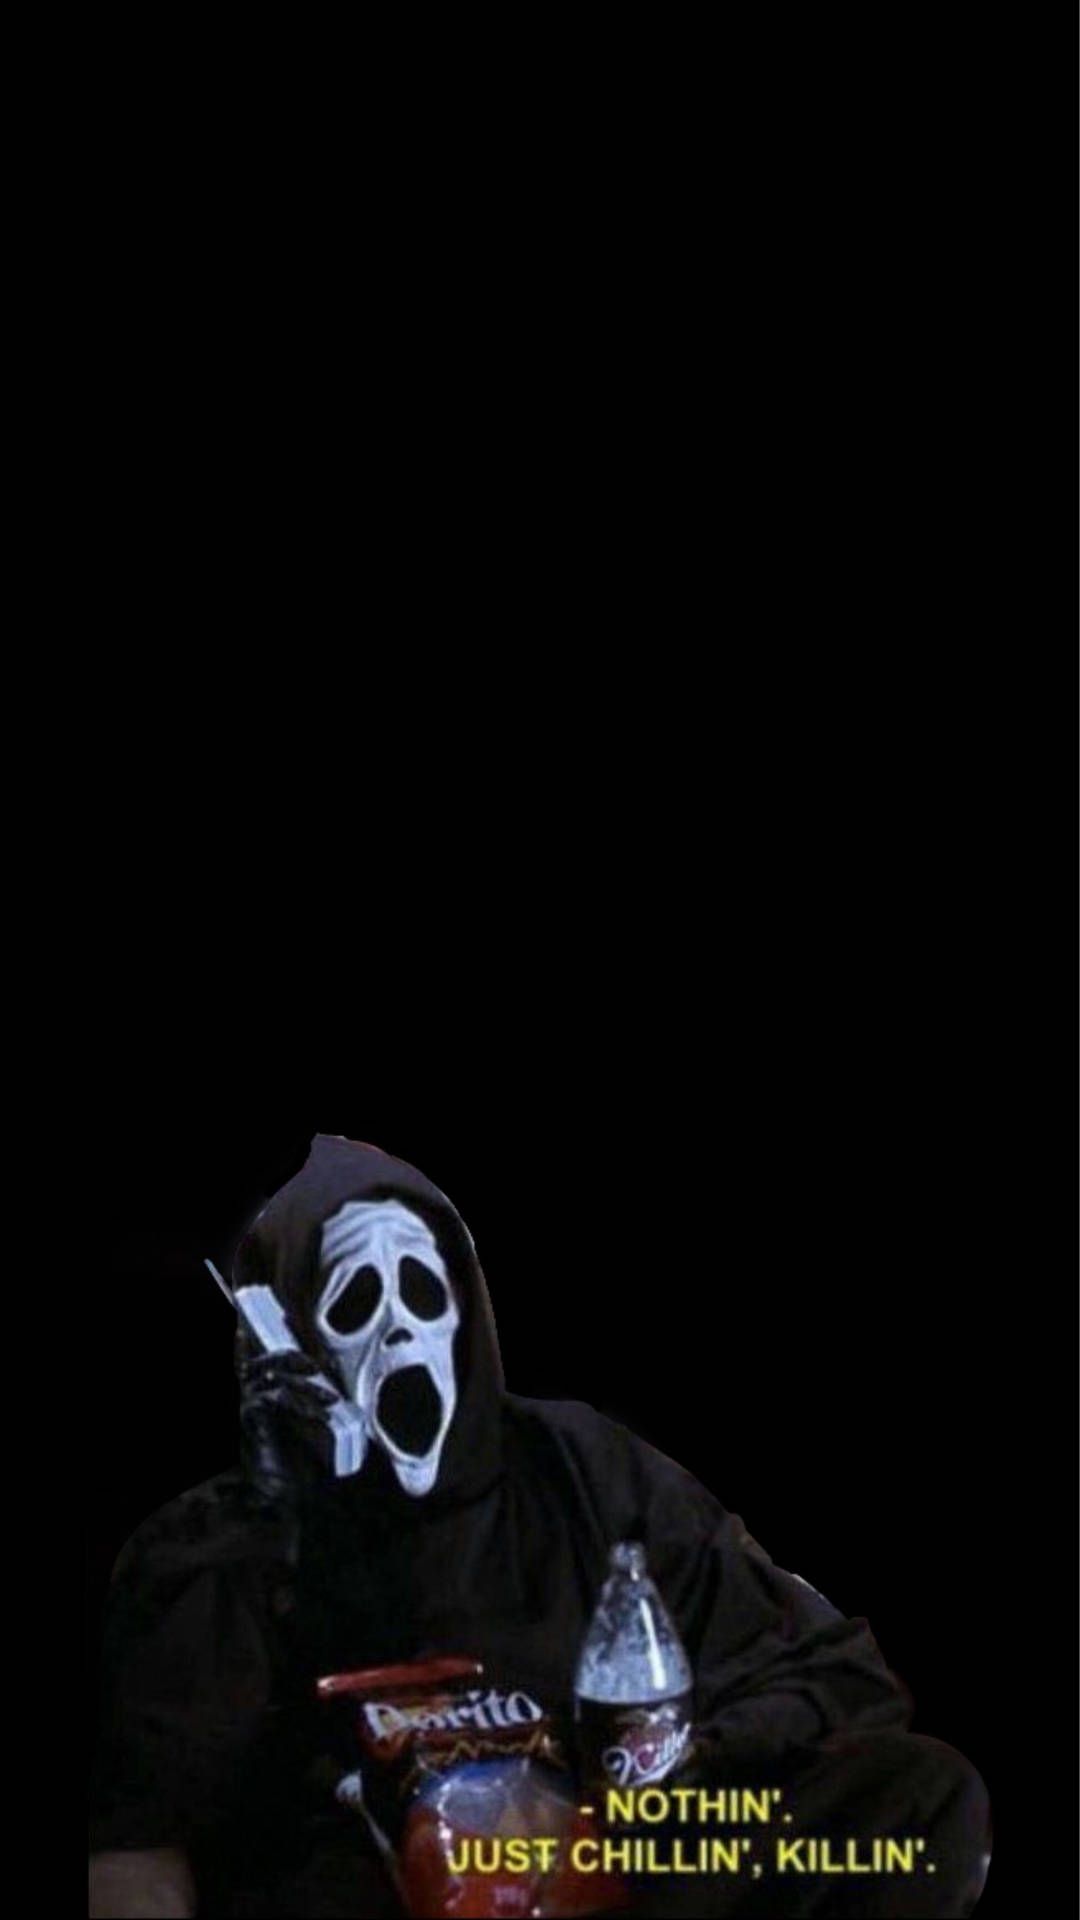 Aesthetic ghostface wallpapers for your phone - Ghostface